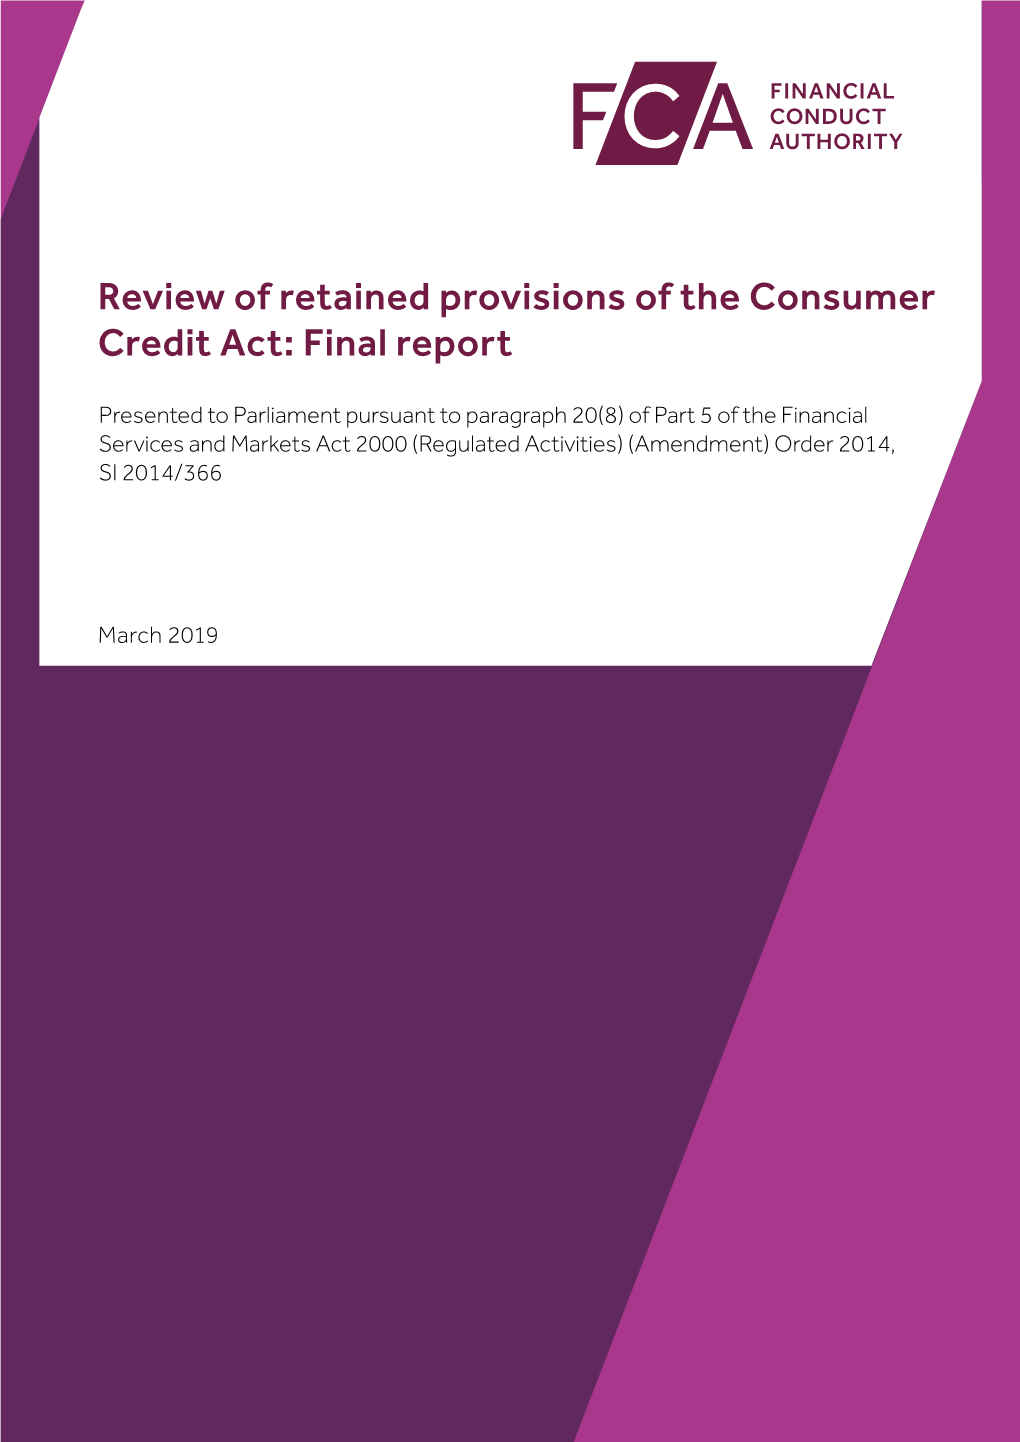 Review of Retained Provisions of the Consumer Credit Act: Final Report